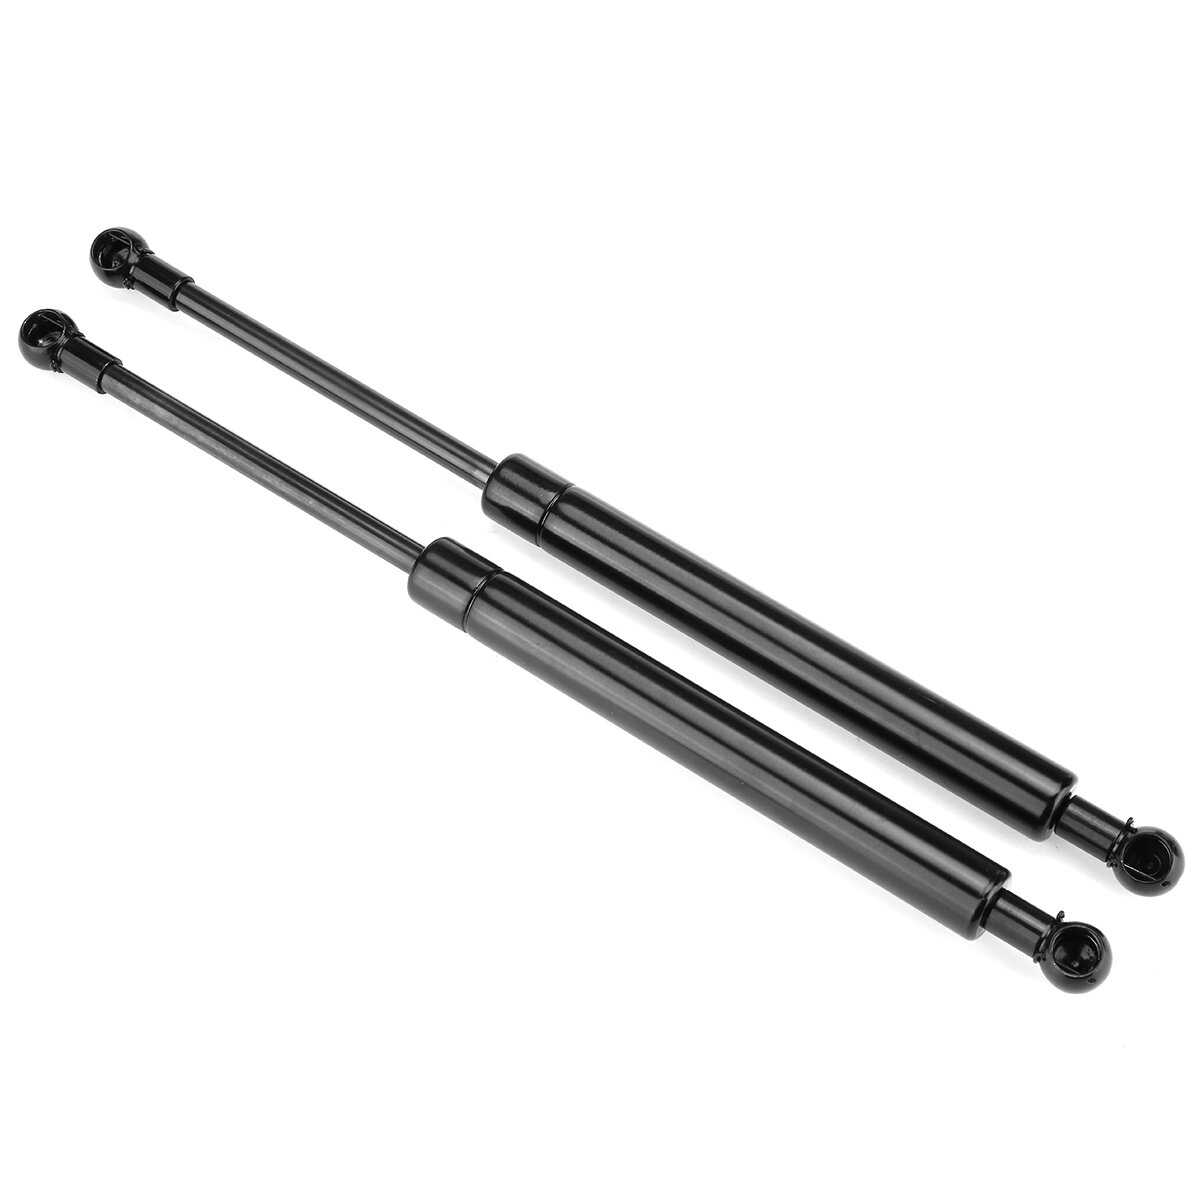 800N 300/350/400/450/500/550/600mm 800N Universal Gas Springs Struts Support Rod For Kit Car or Conversion